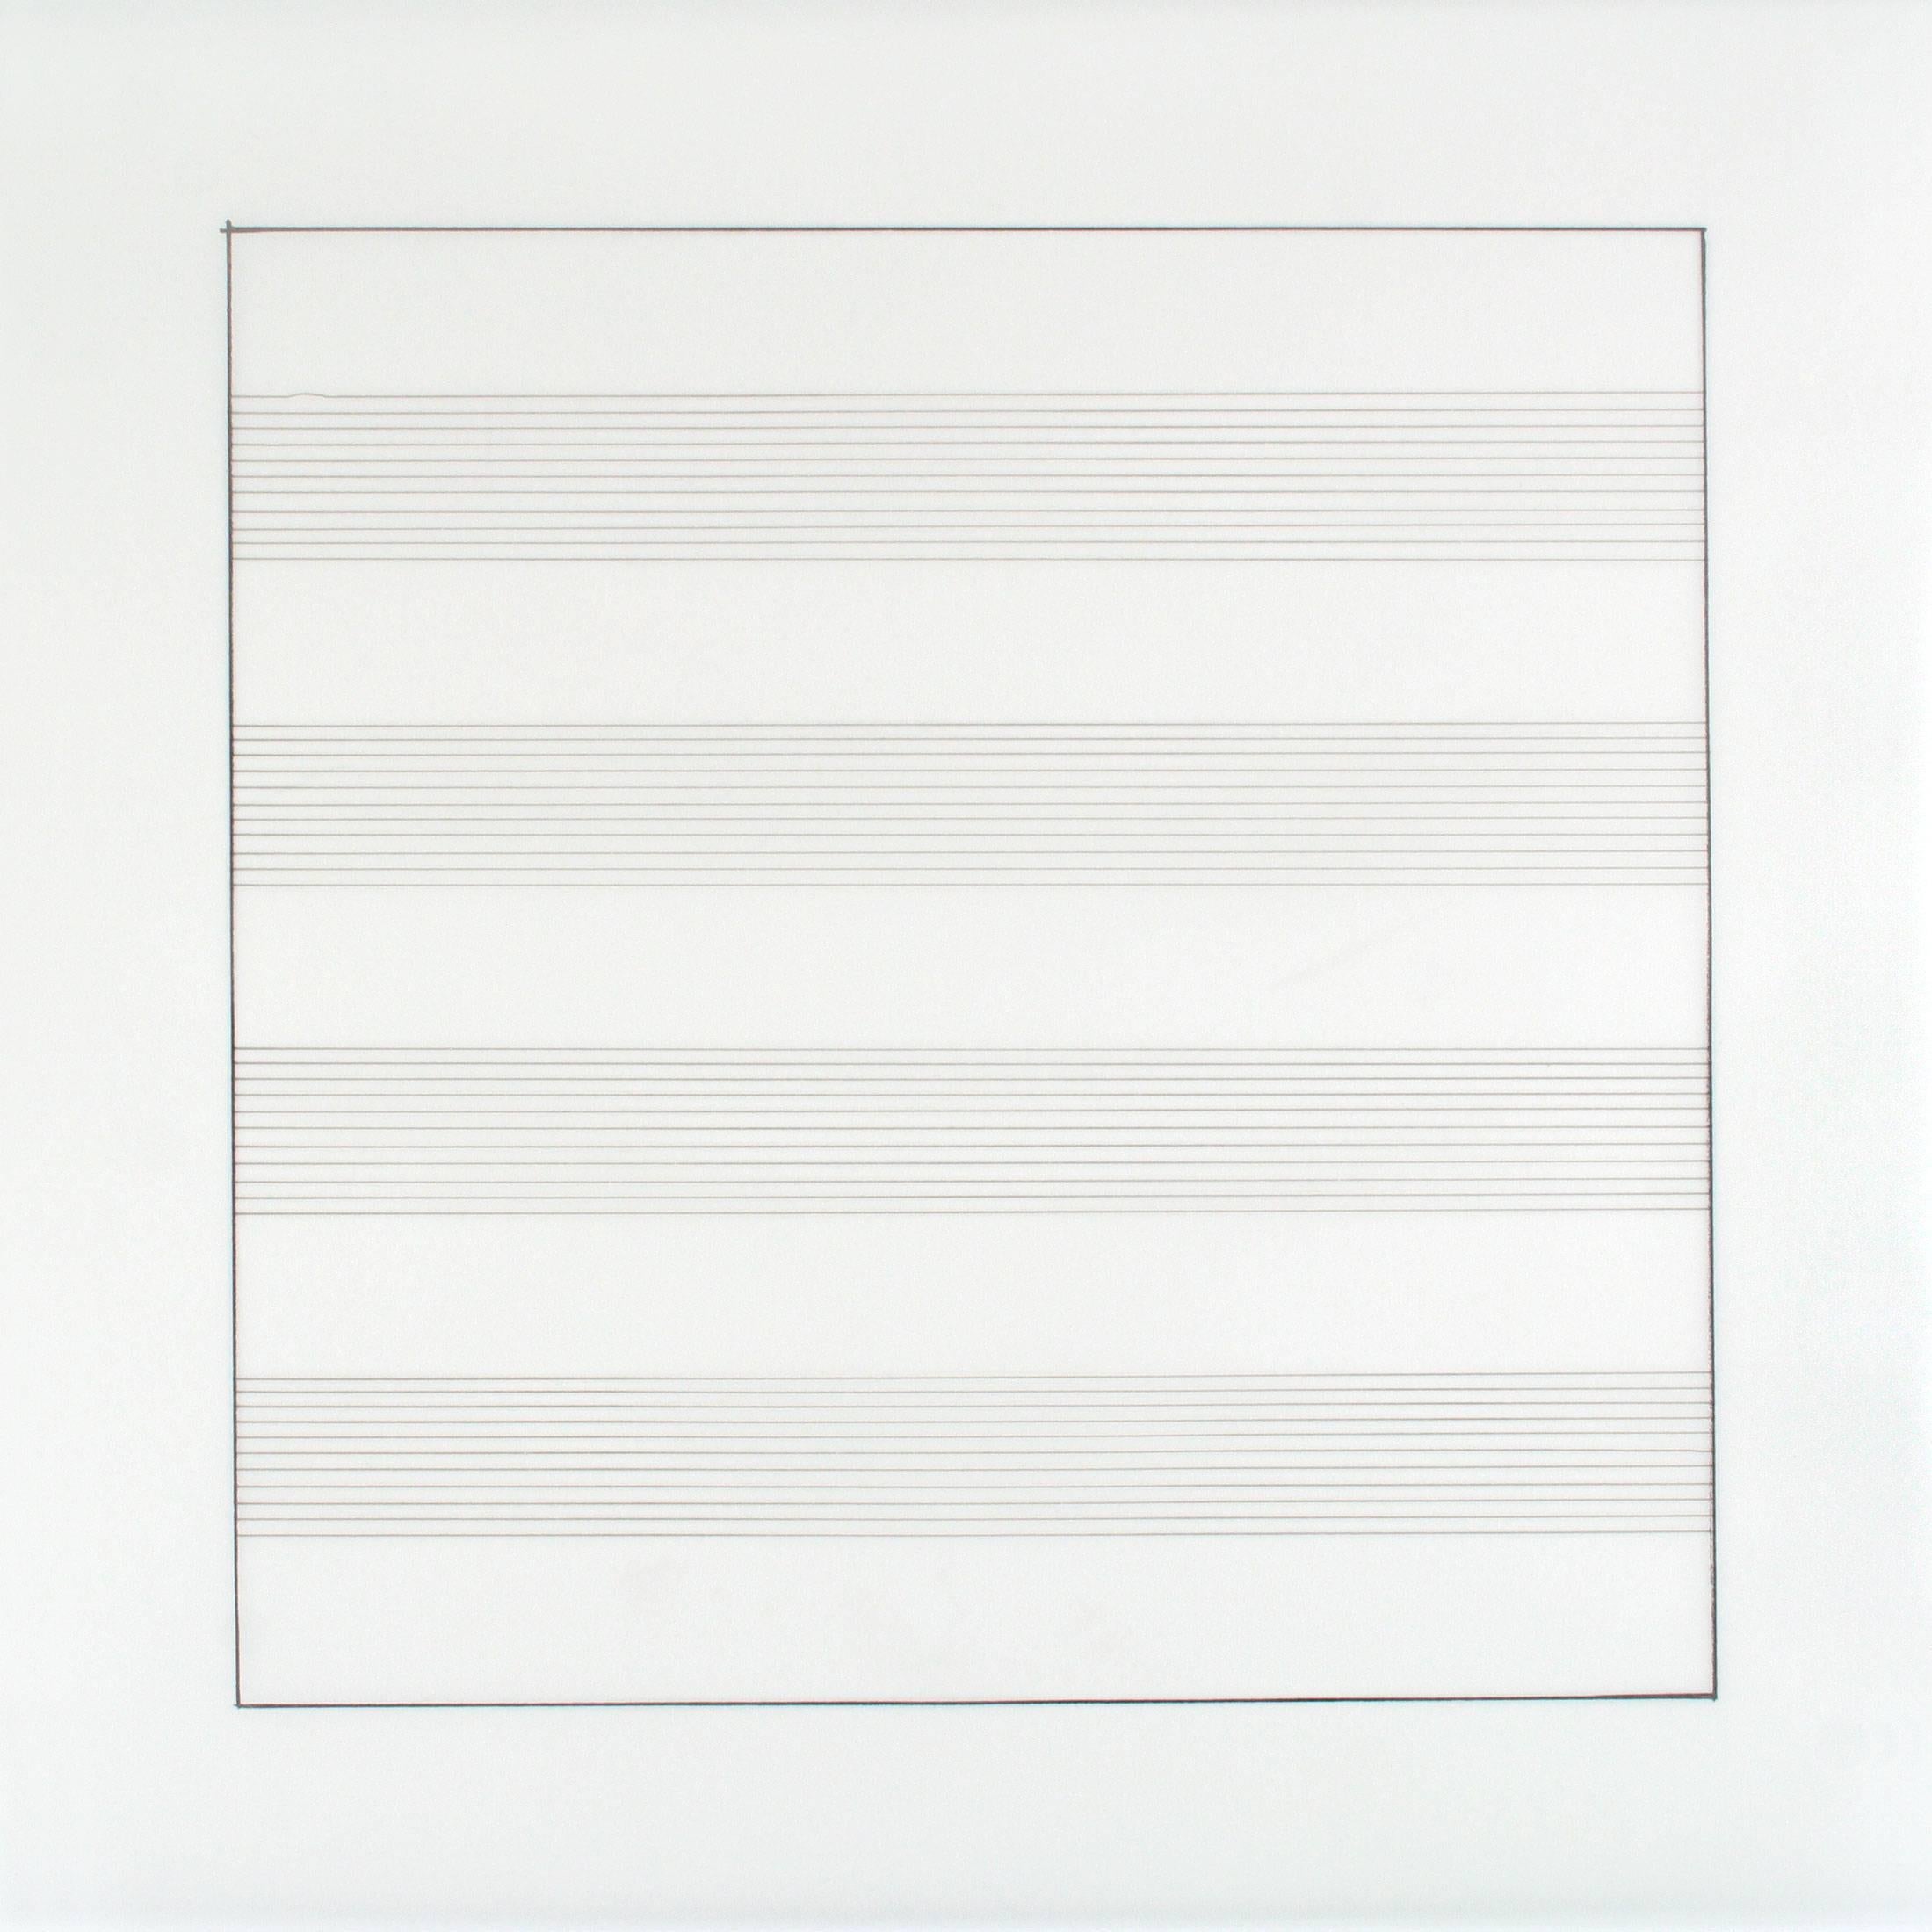 AGNES MARTIN. Paintings and Drawings 1974-1990 2